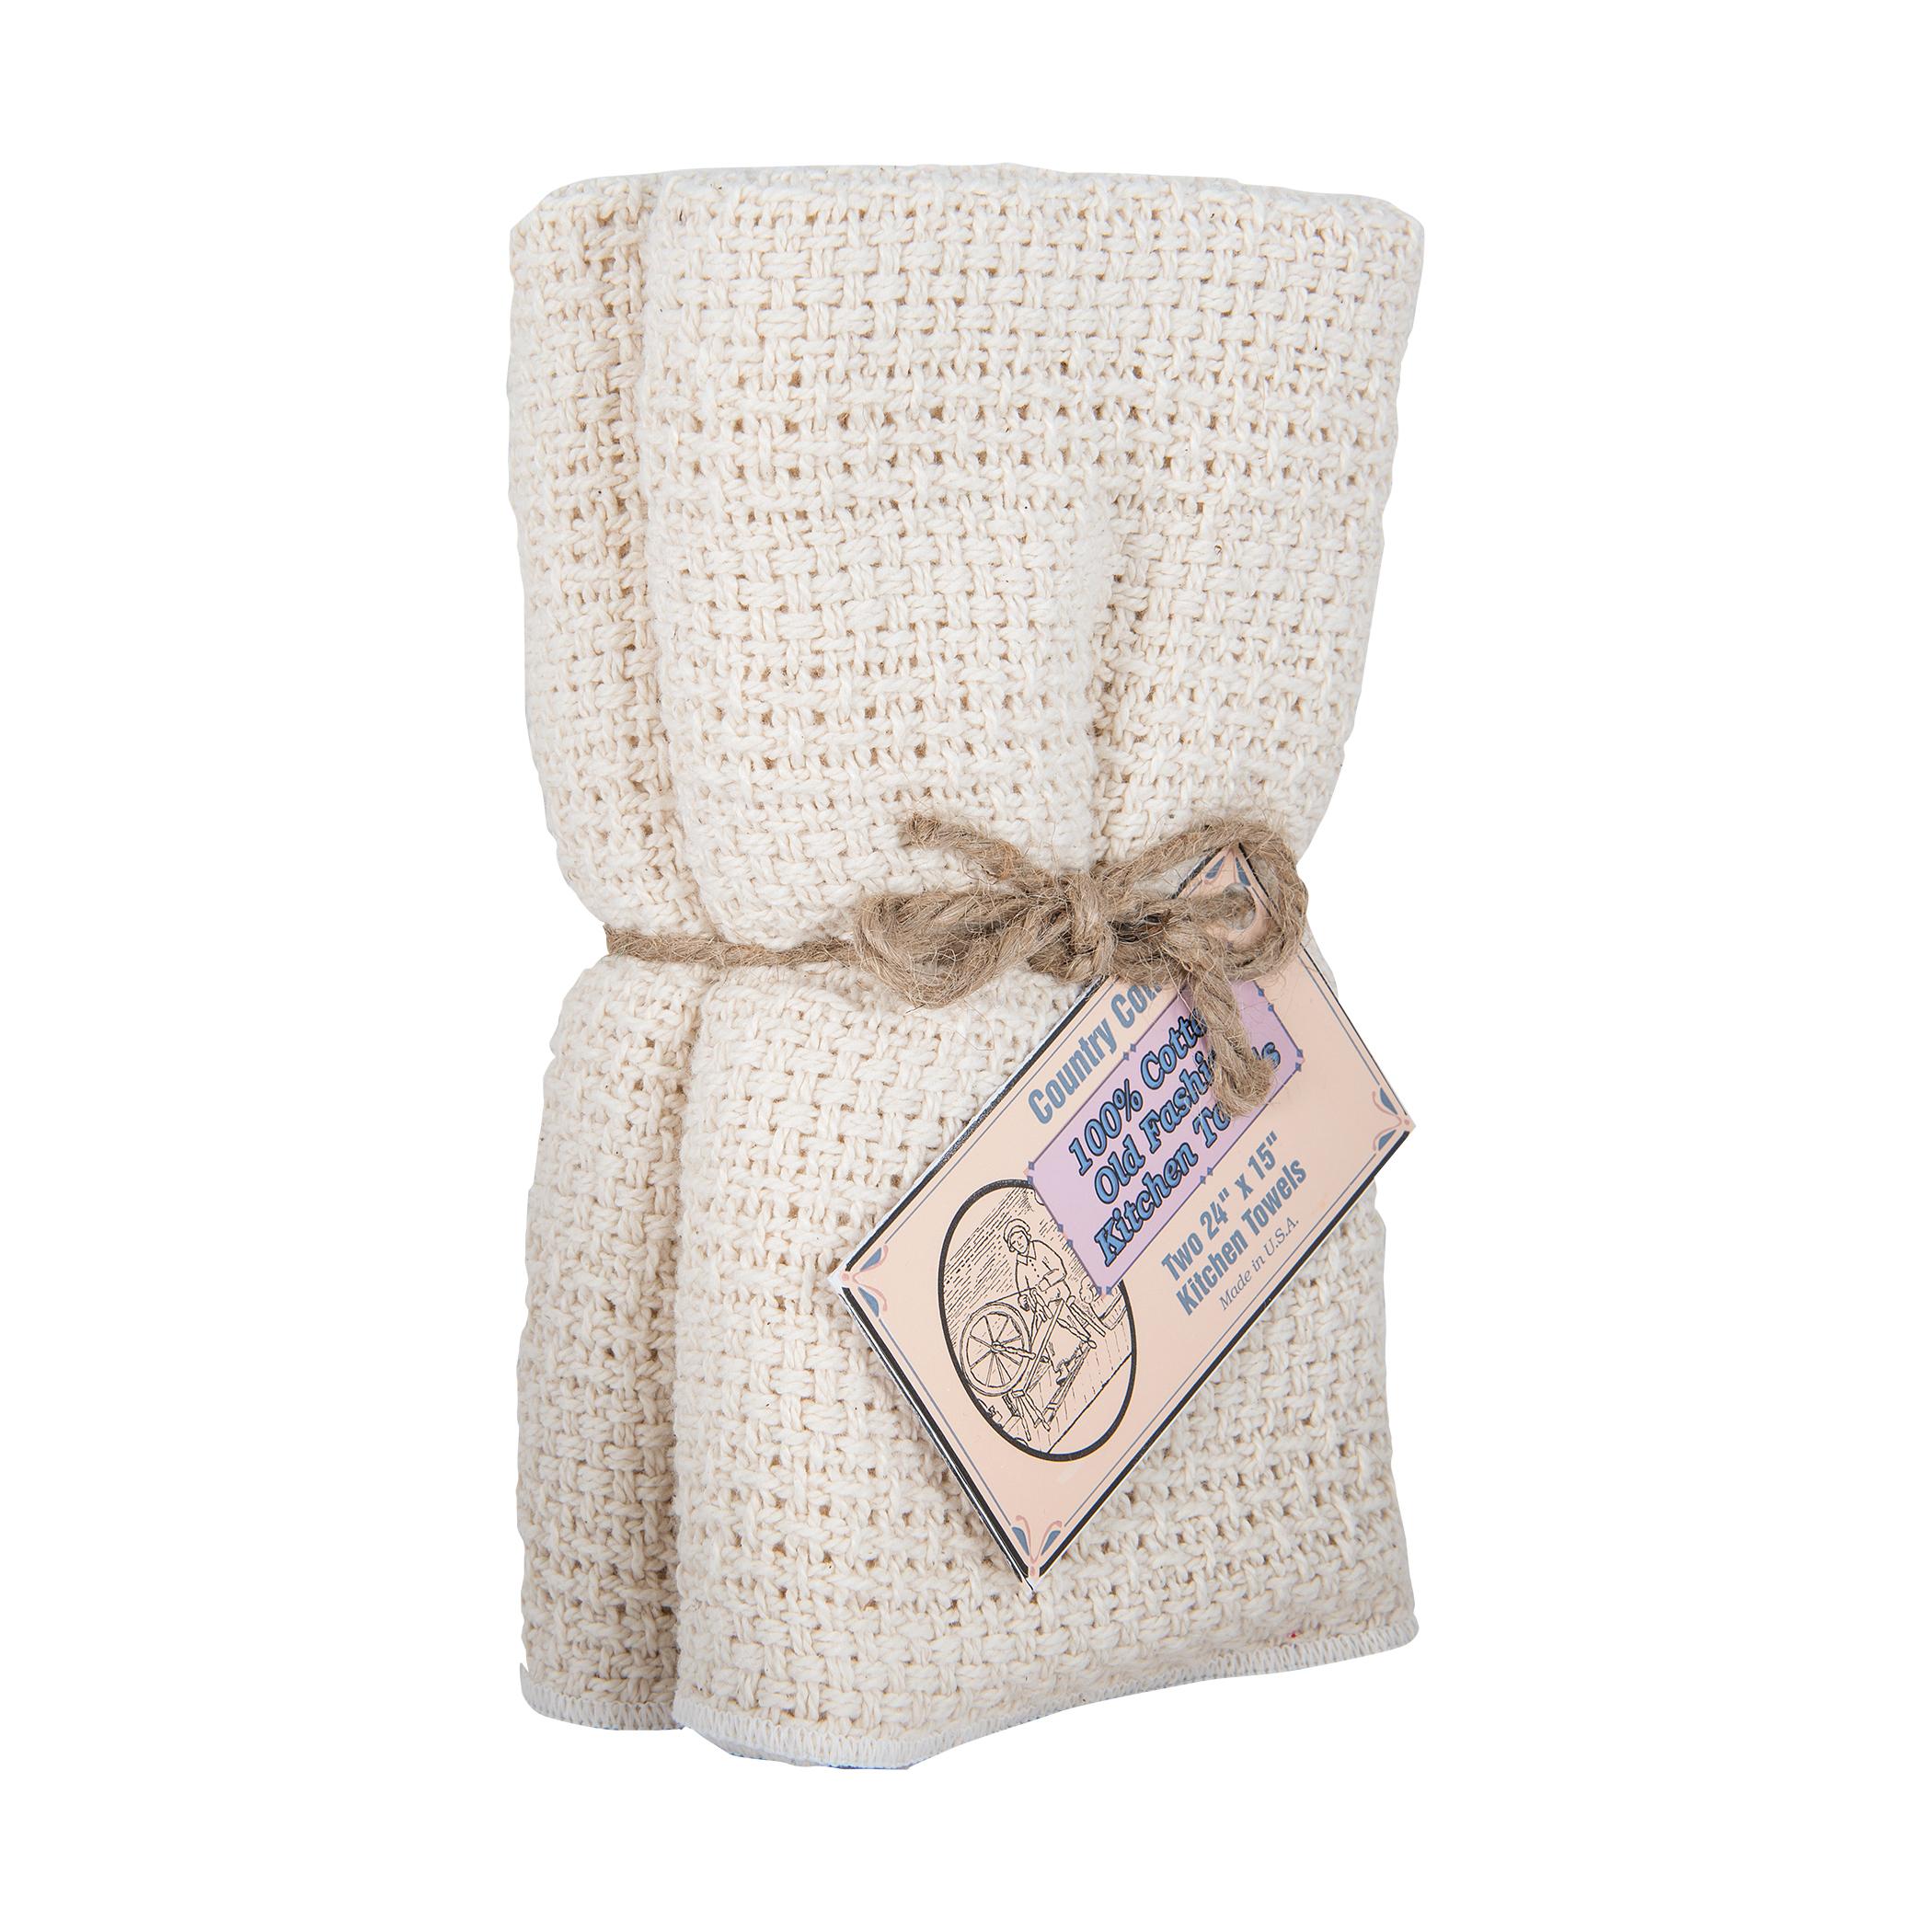 Old Fashioned Dish Towel - 2 Pack